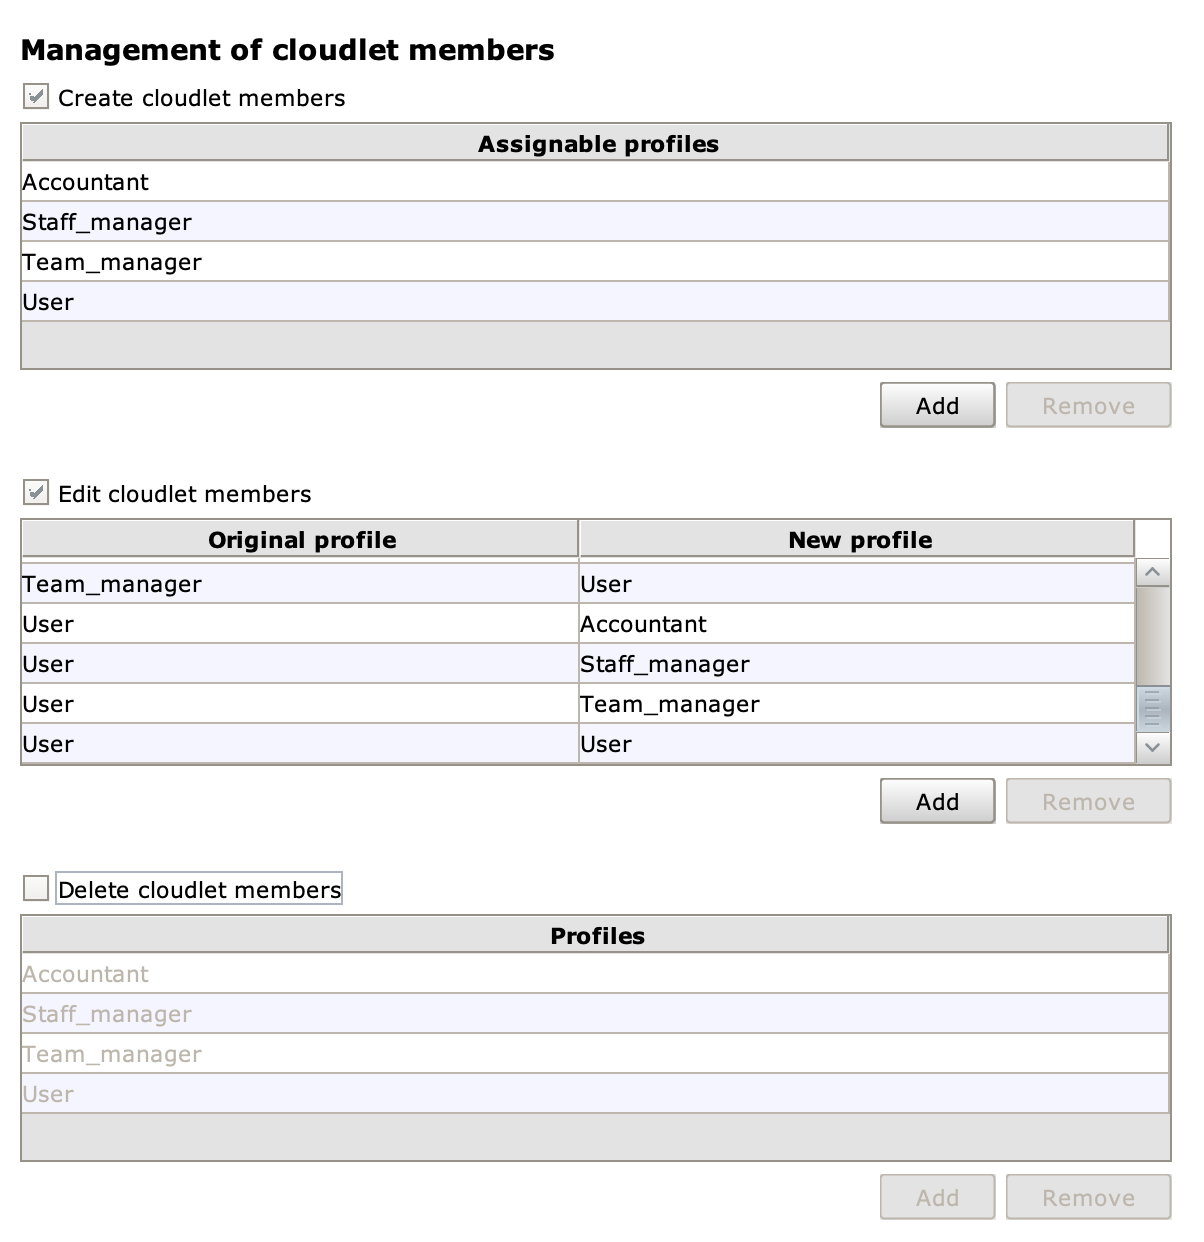 Management of cloudlet members